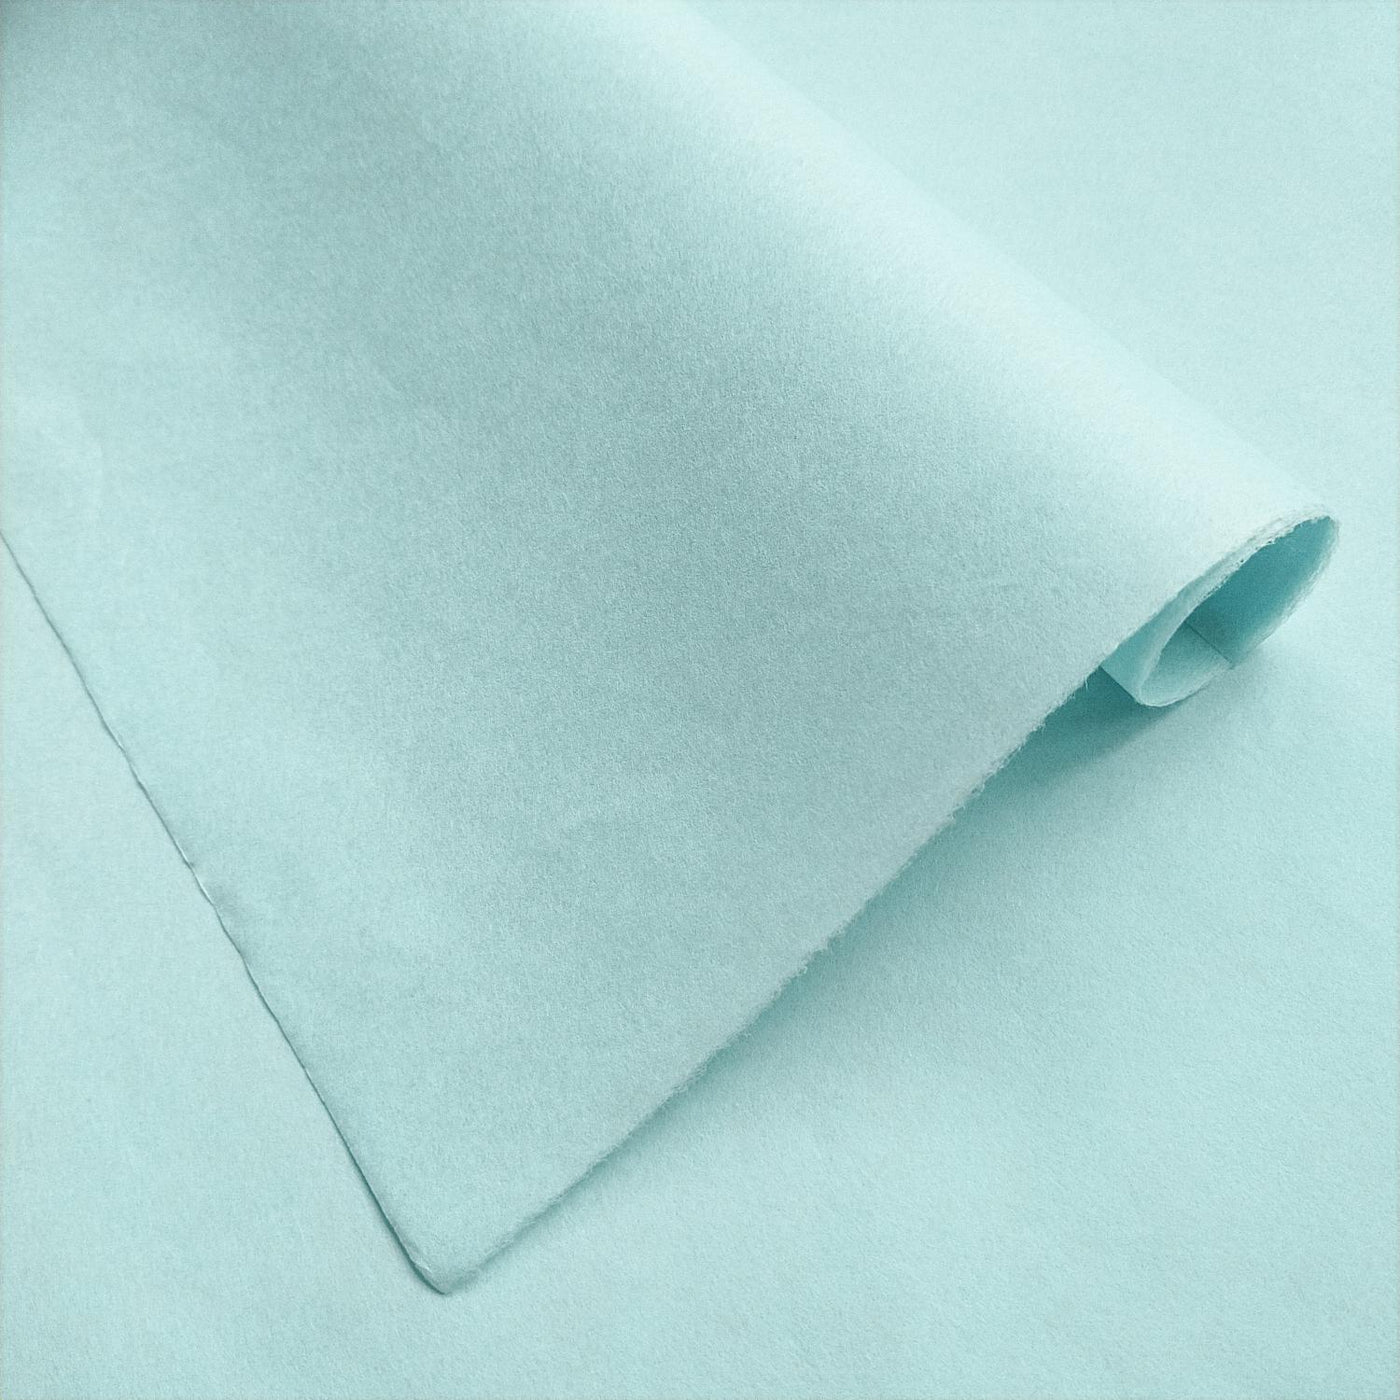 Solid-Colored Kozo Mulberry Paper (Sky Blue)